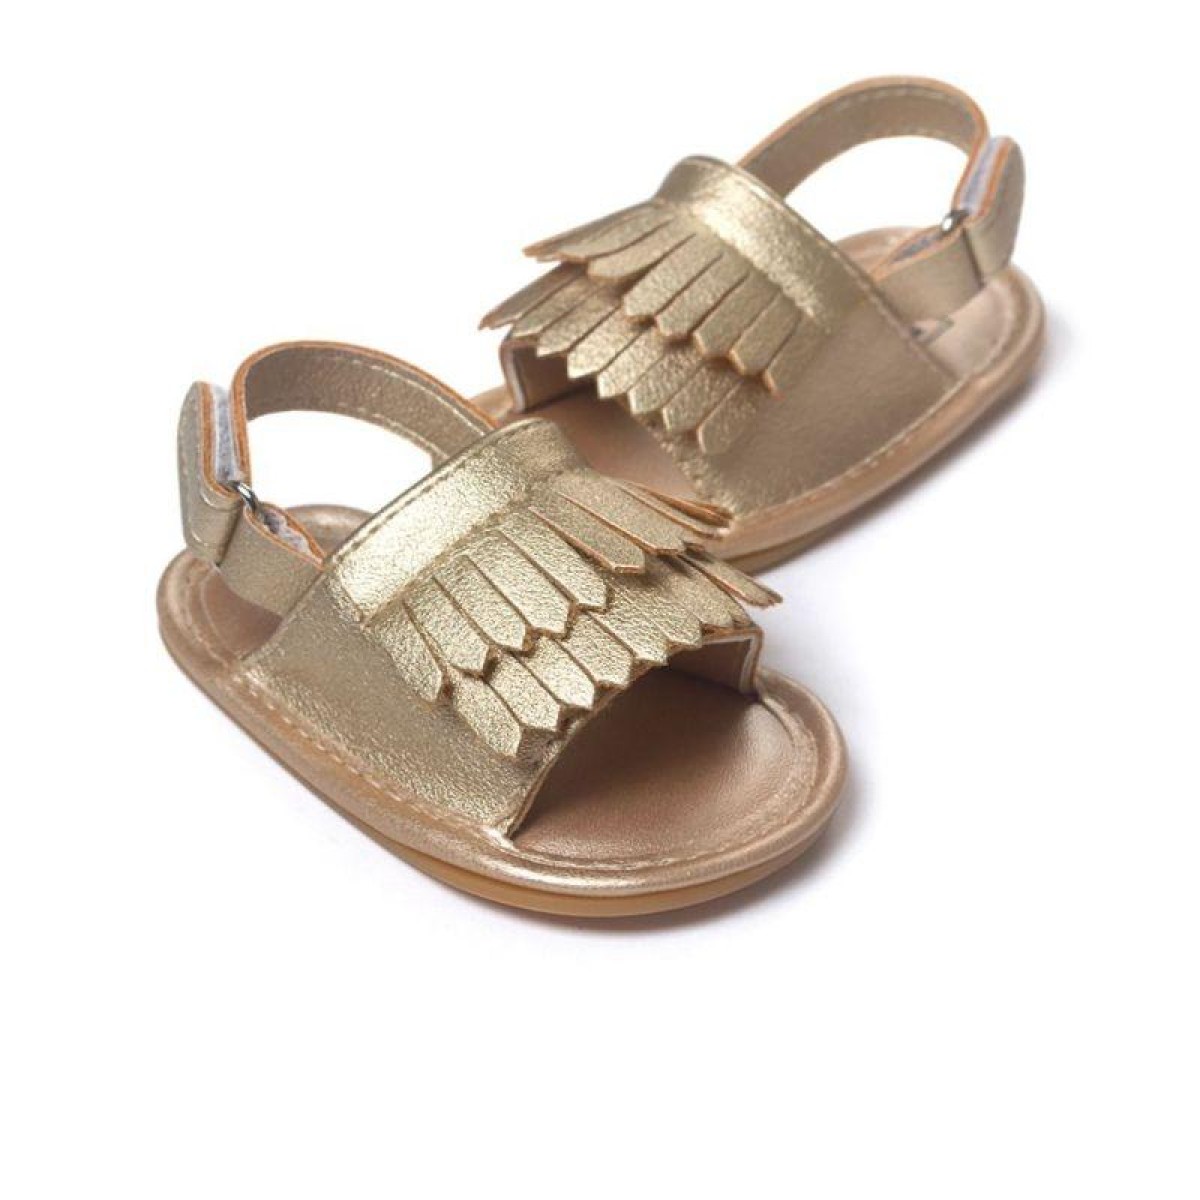 Casual Fashion PU Fringed Baby Sandals, Size:13cm/93g(White)